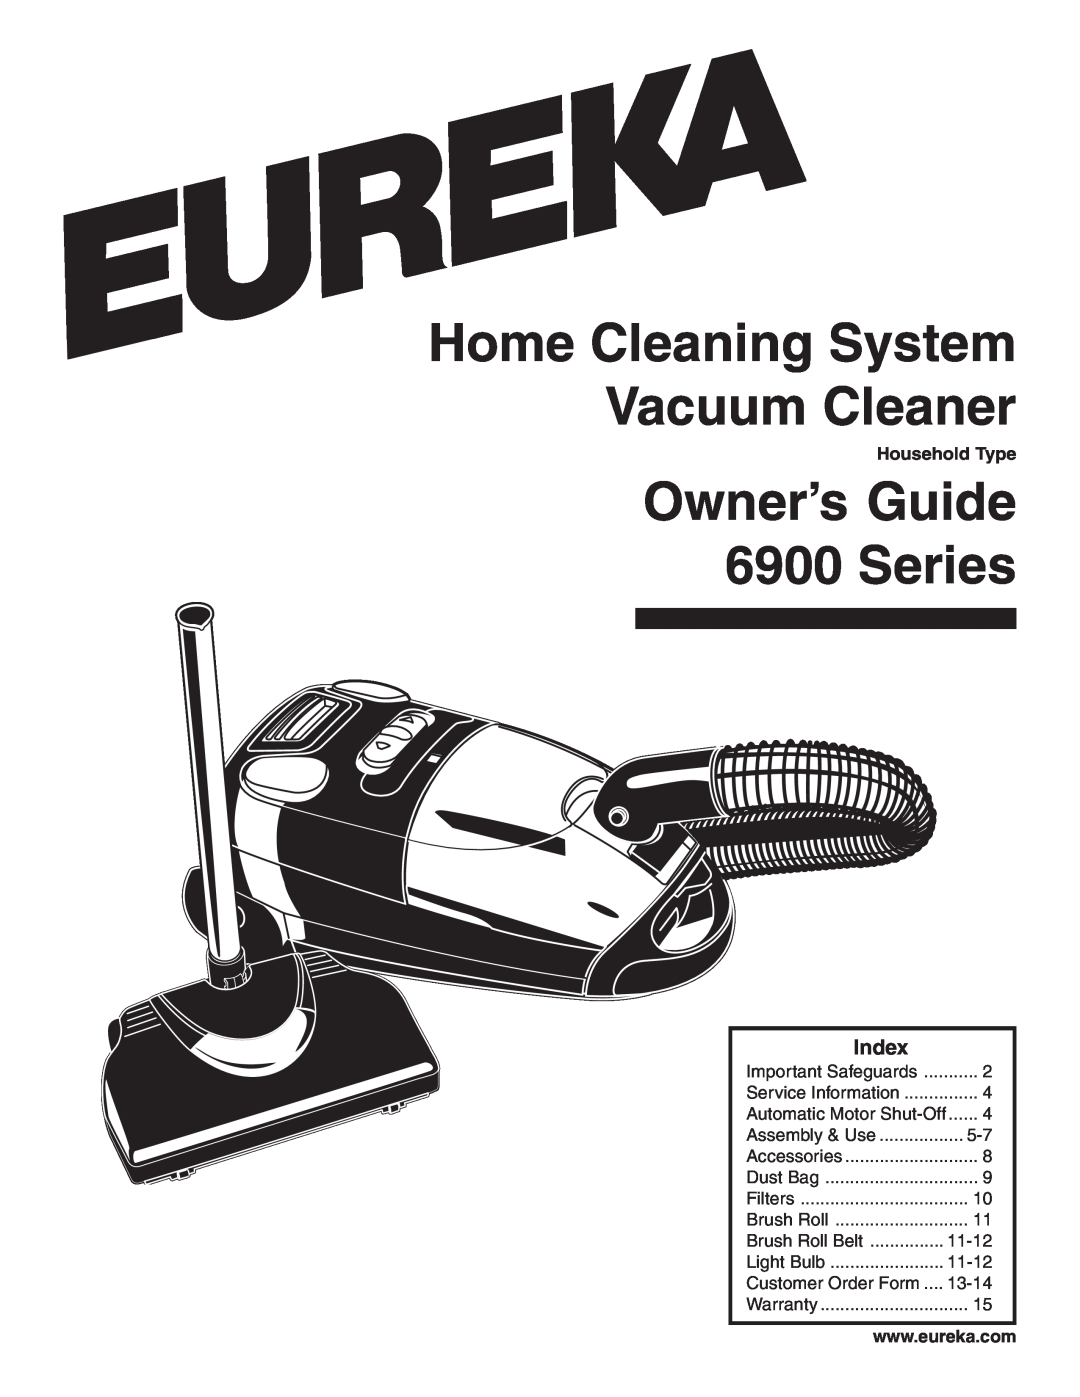 Eureka warranty Index, Household Type, Home Cleaning System Vacuum Cleaner, Owner’s Guide 6900 Series, Assembly & Use 